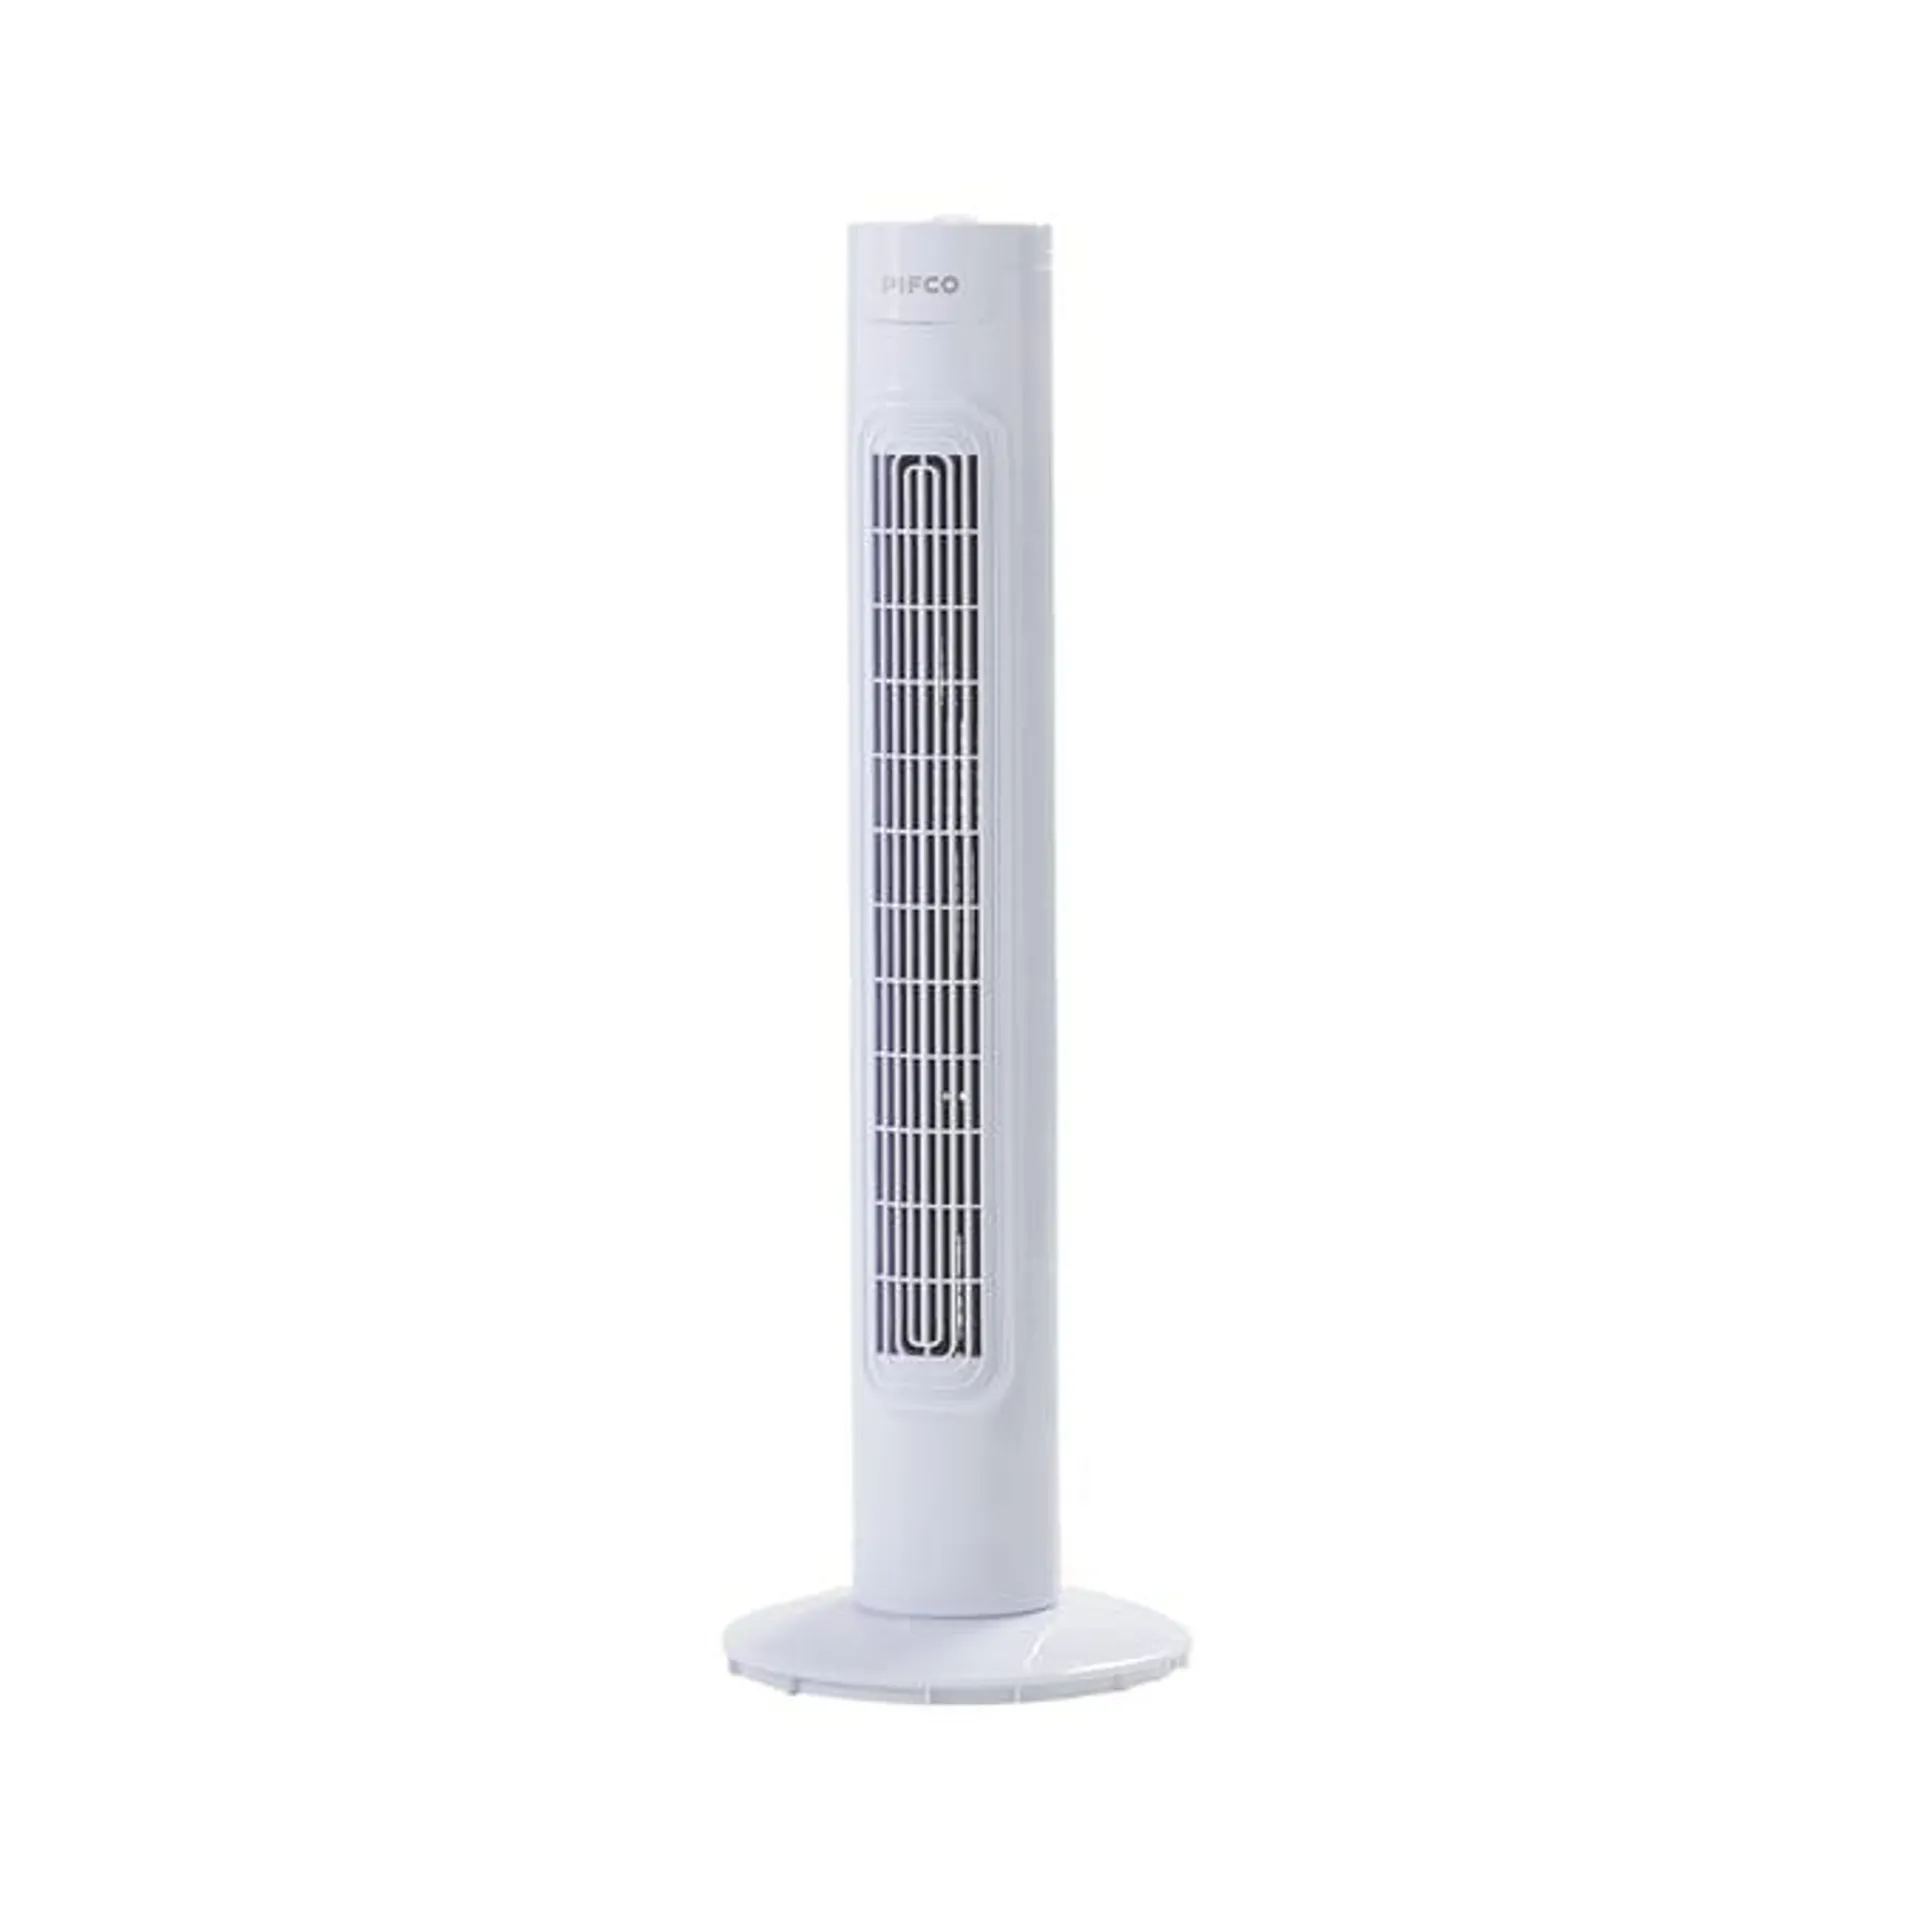 Pifco 32" Oscillating Tower Fan